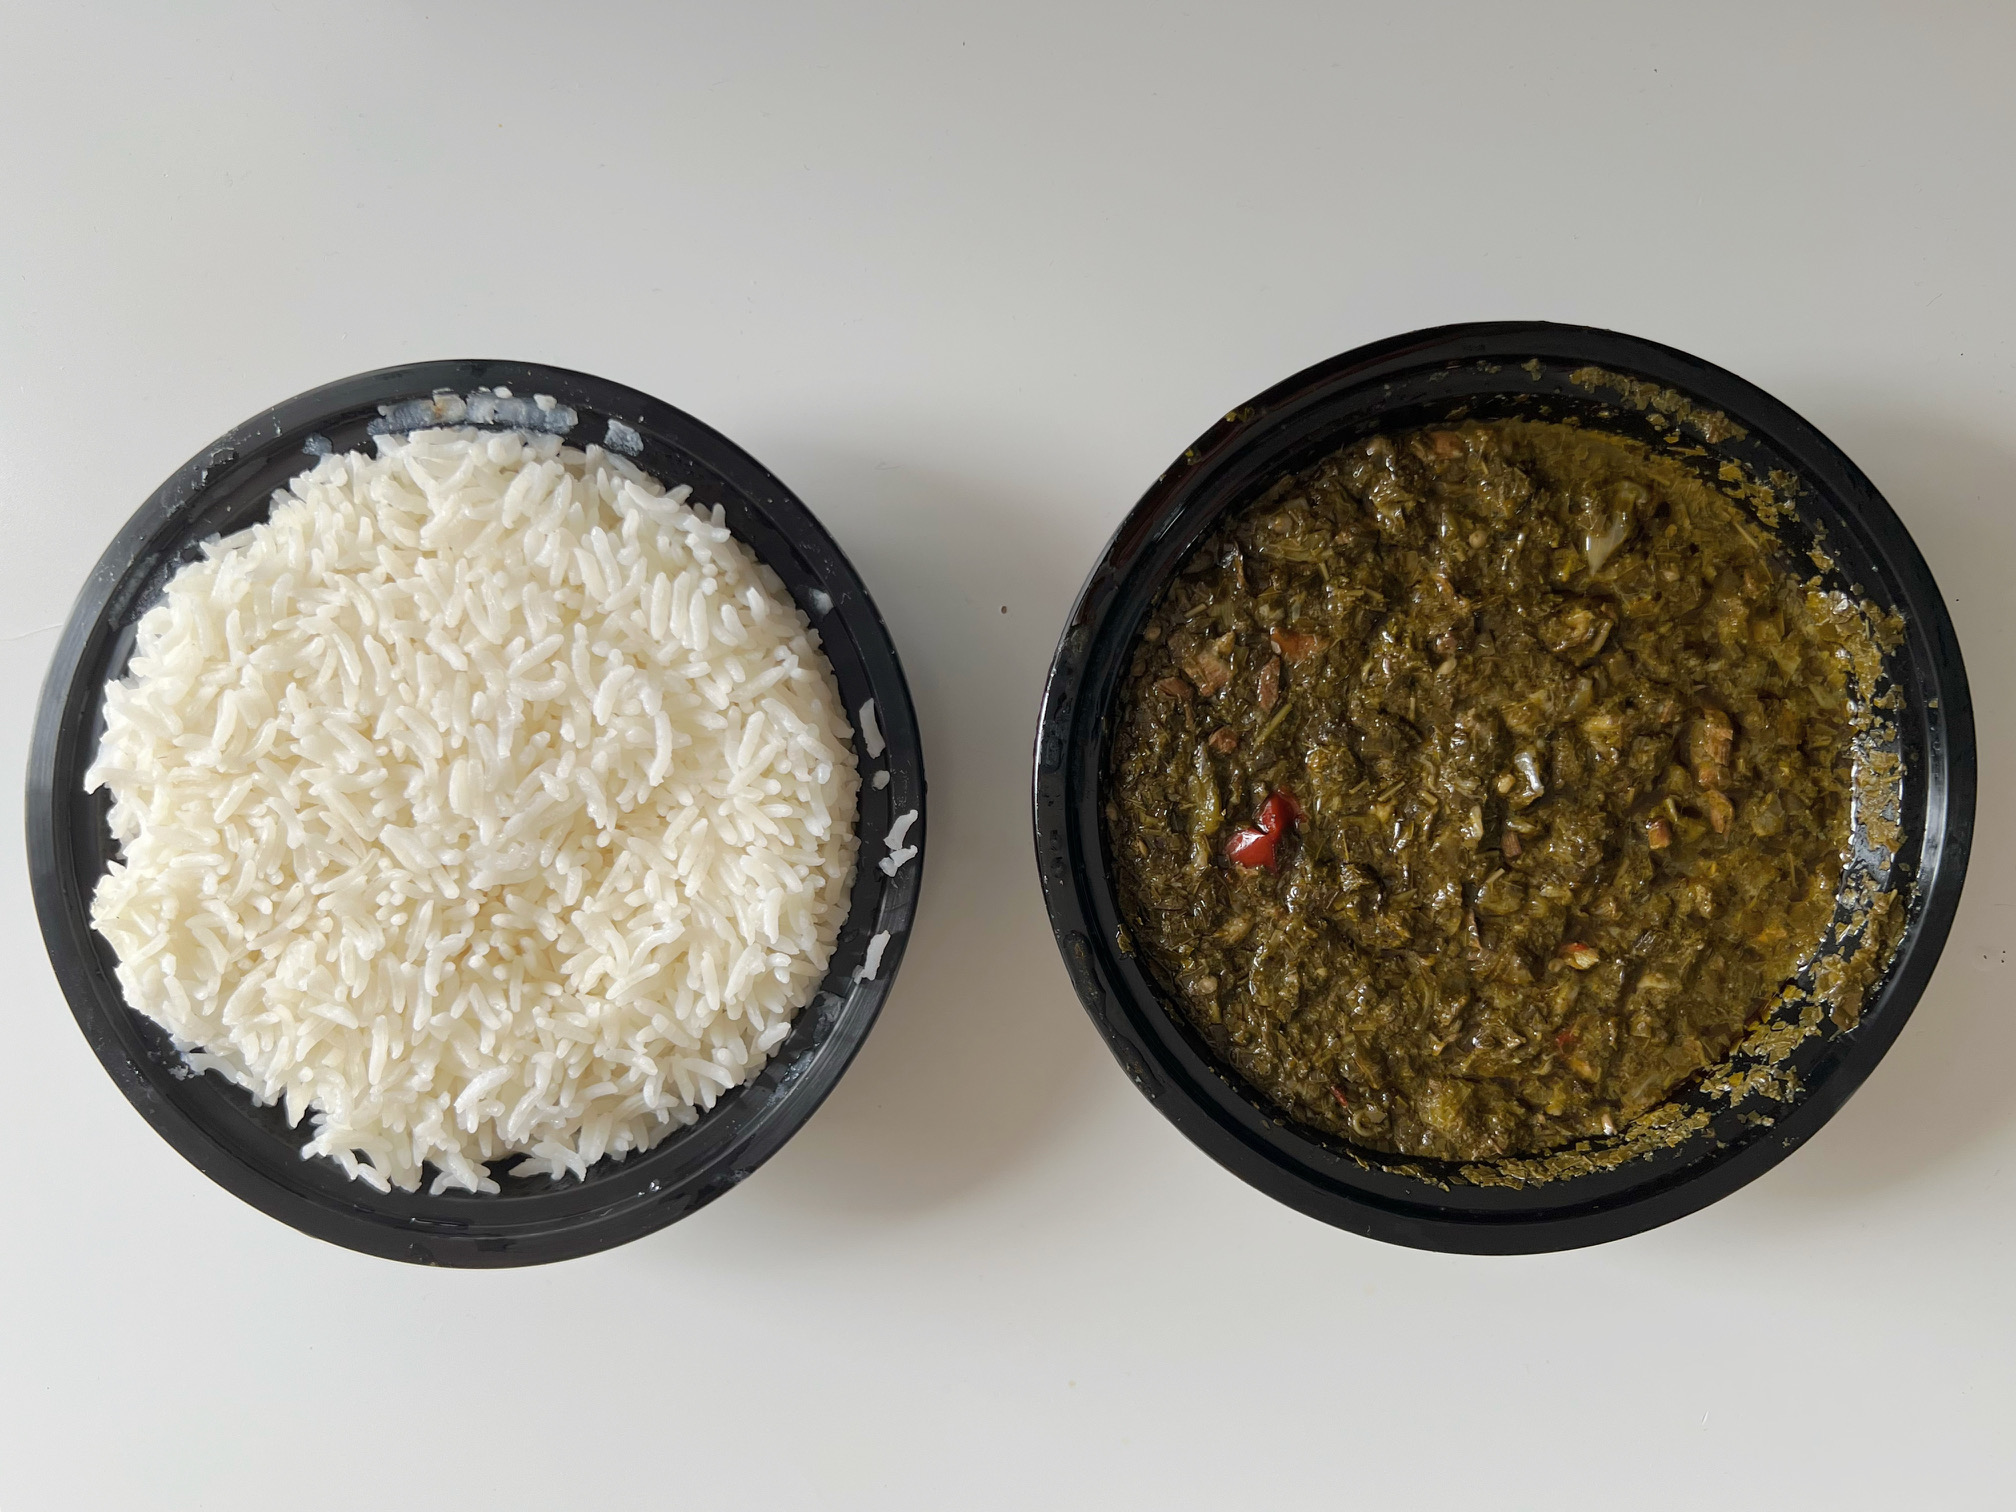 On a white table, there are two circular plastic containers. The one on the left is full of white rice, and the one one the right is full of pondu, stewed cassava leaves. Photo by Alyssa Buckley.